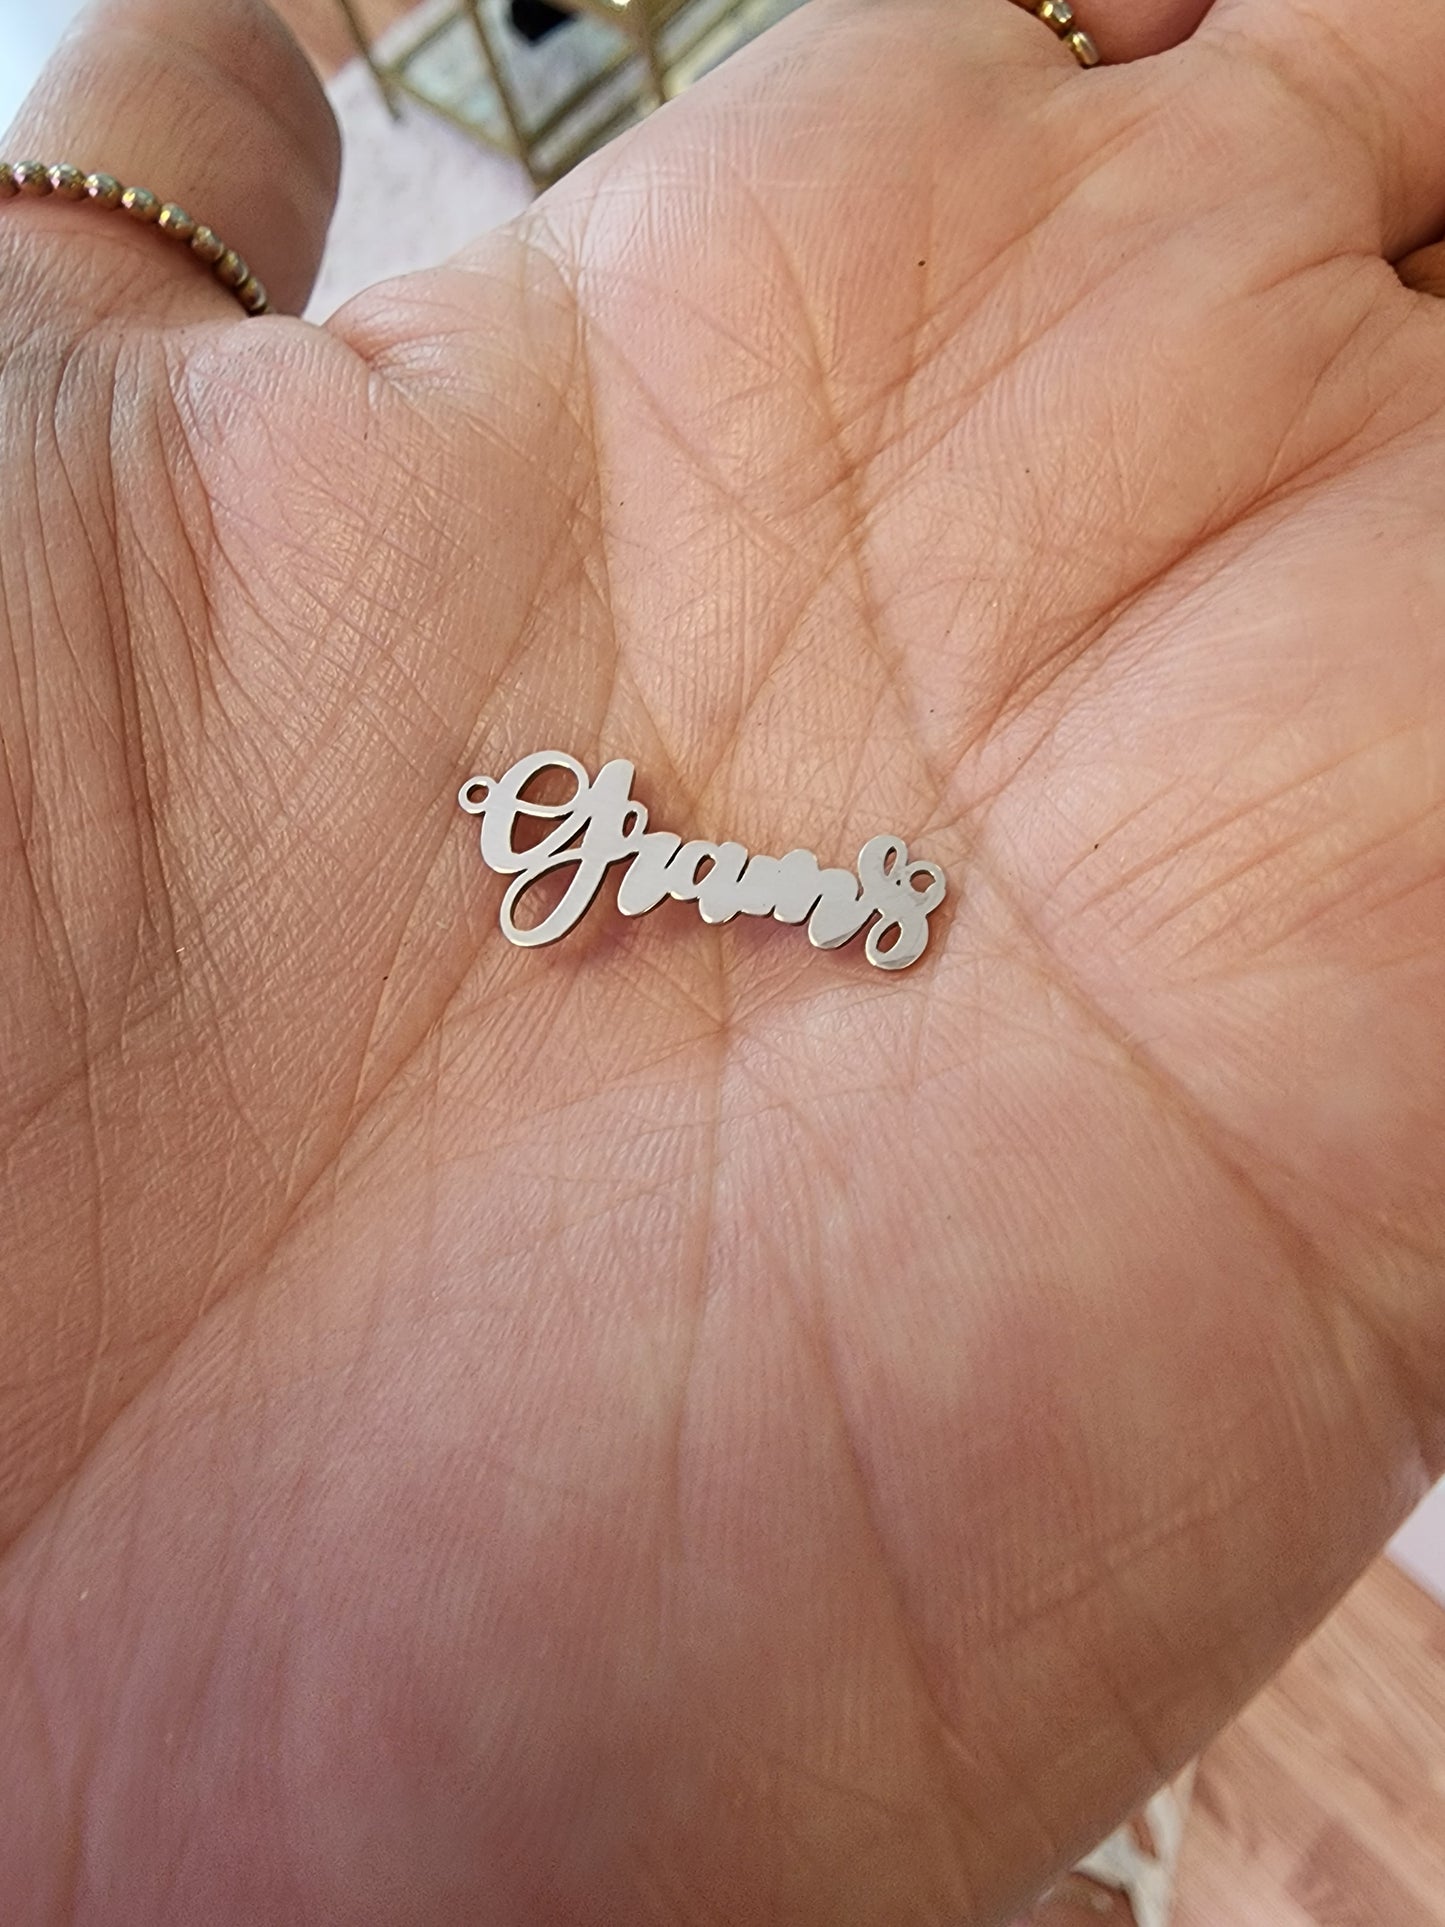 Grams or Gram connector for permanent jewelry in gold filled or sterling silver